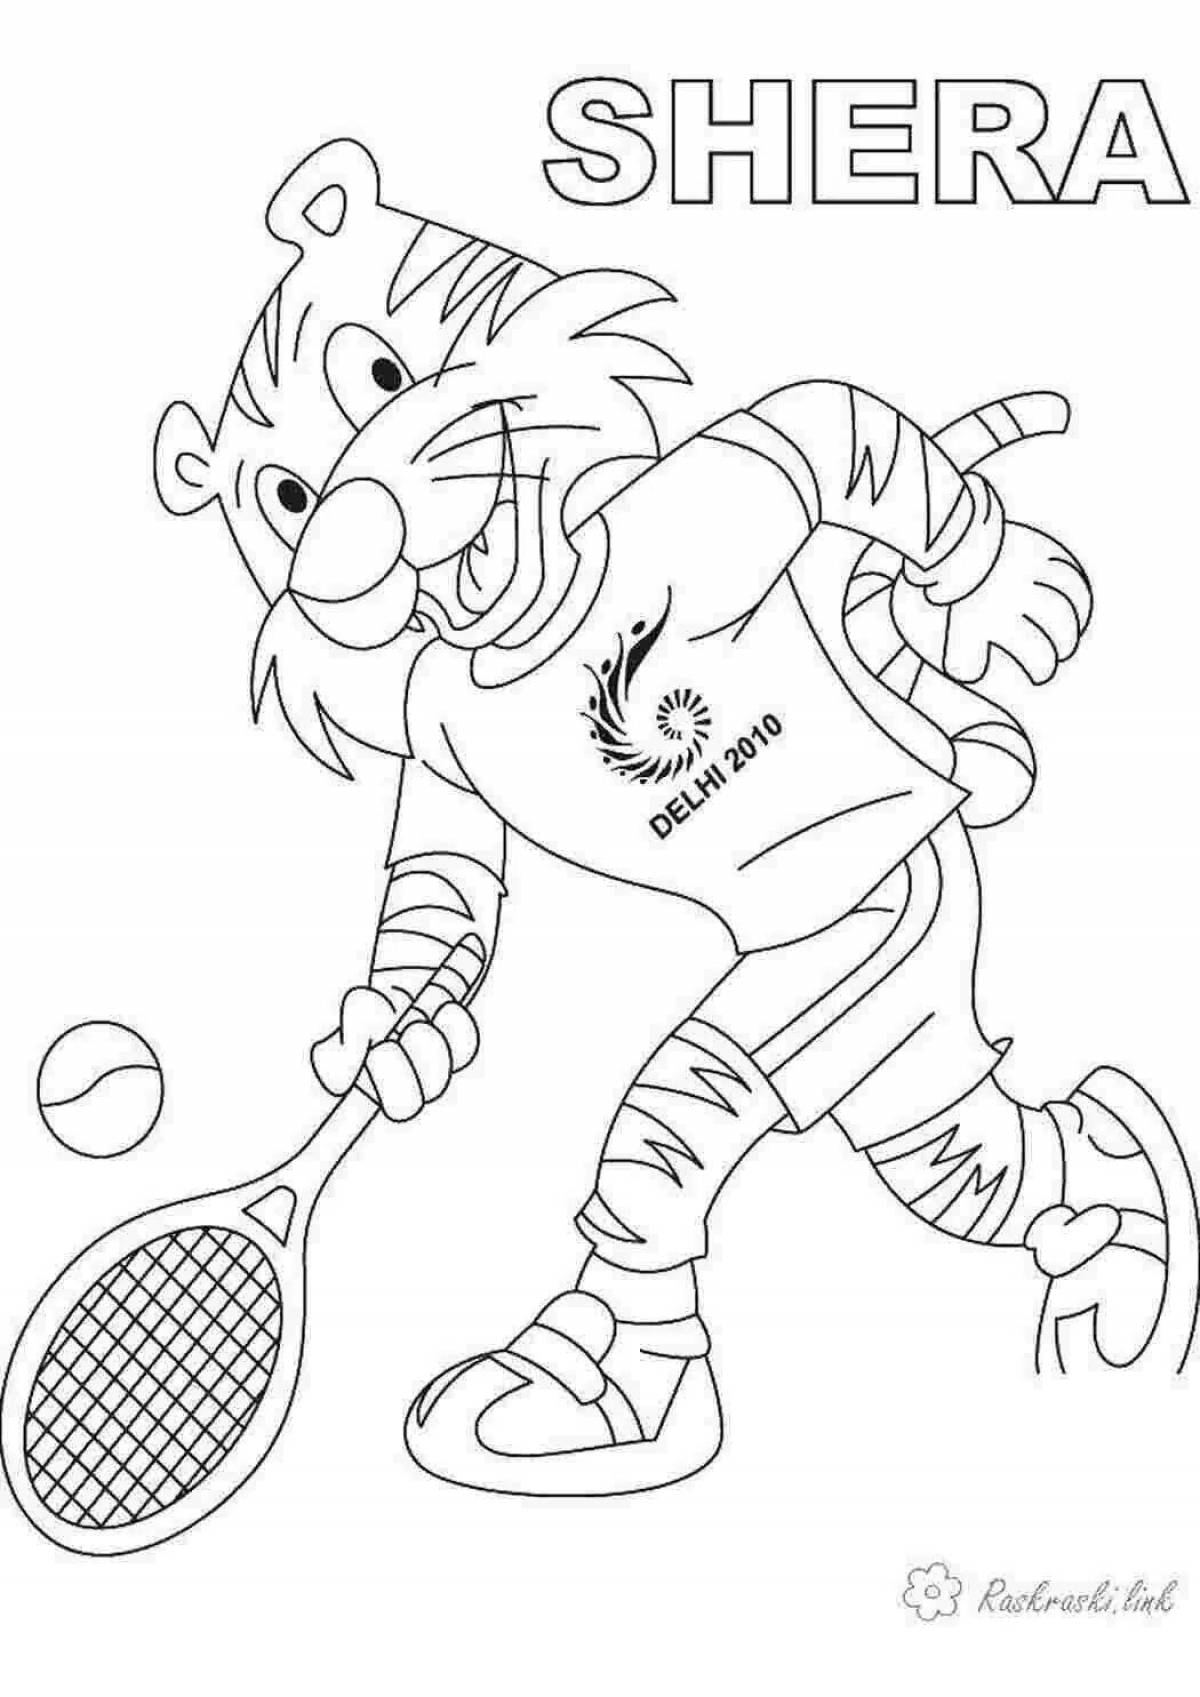 Fun sports coloring book for kids